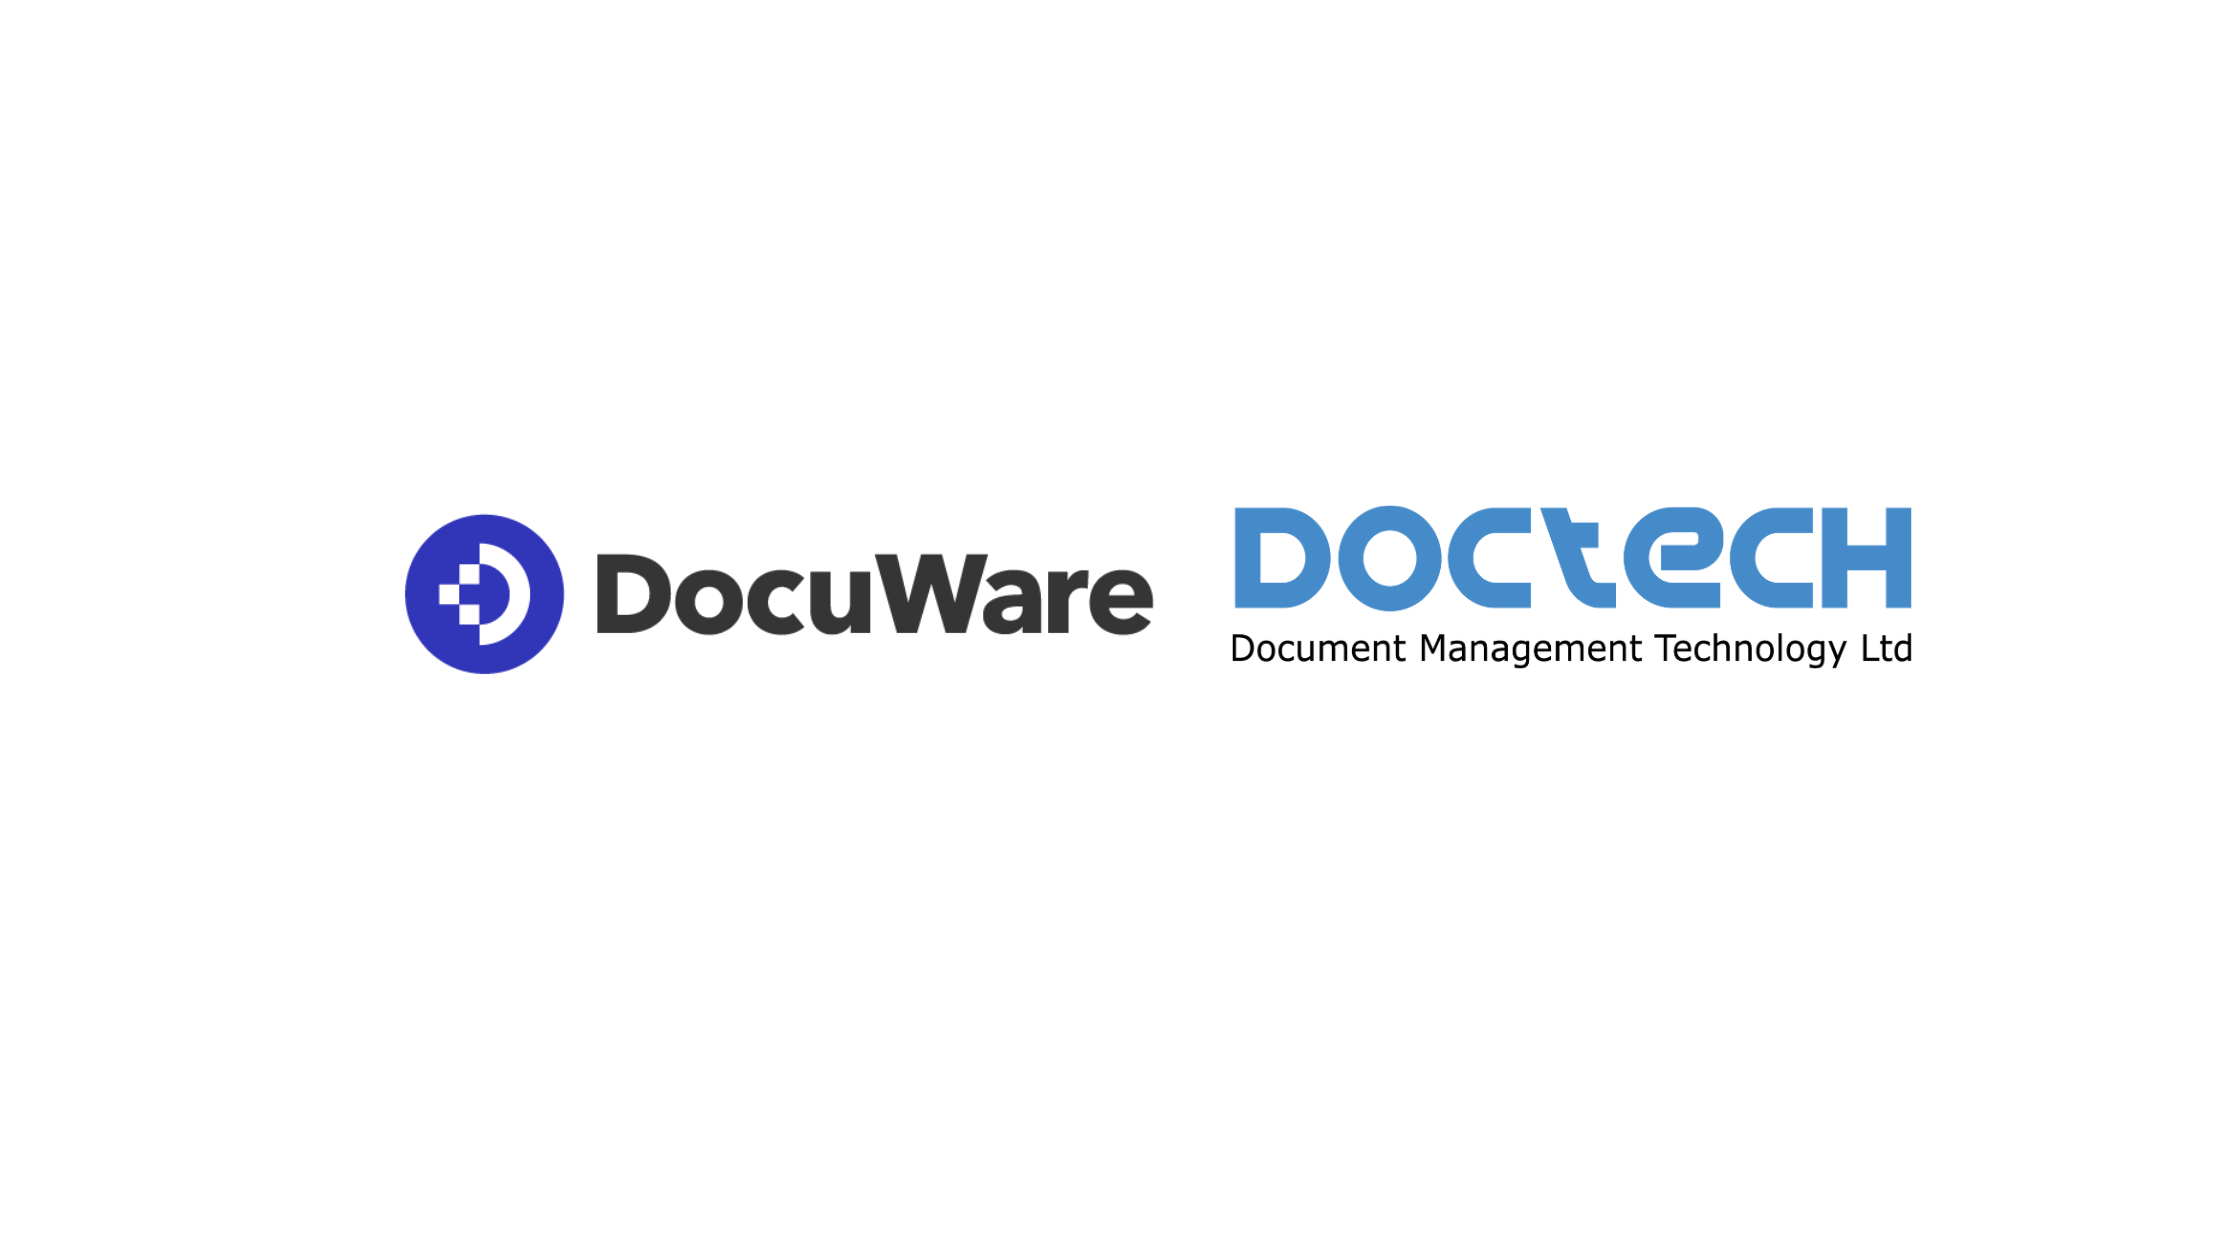 The Latest DocuWare Releases – An Overview From DocTech